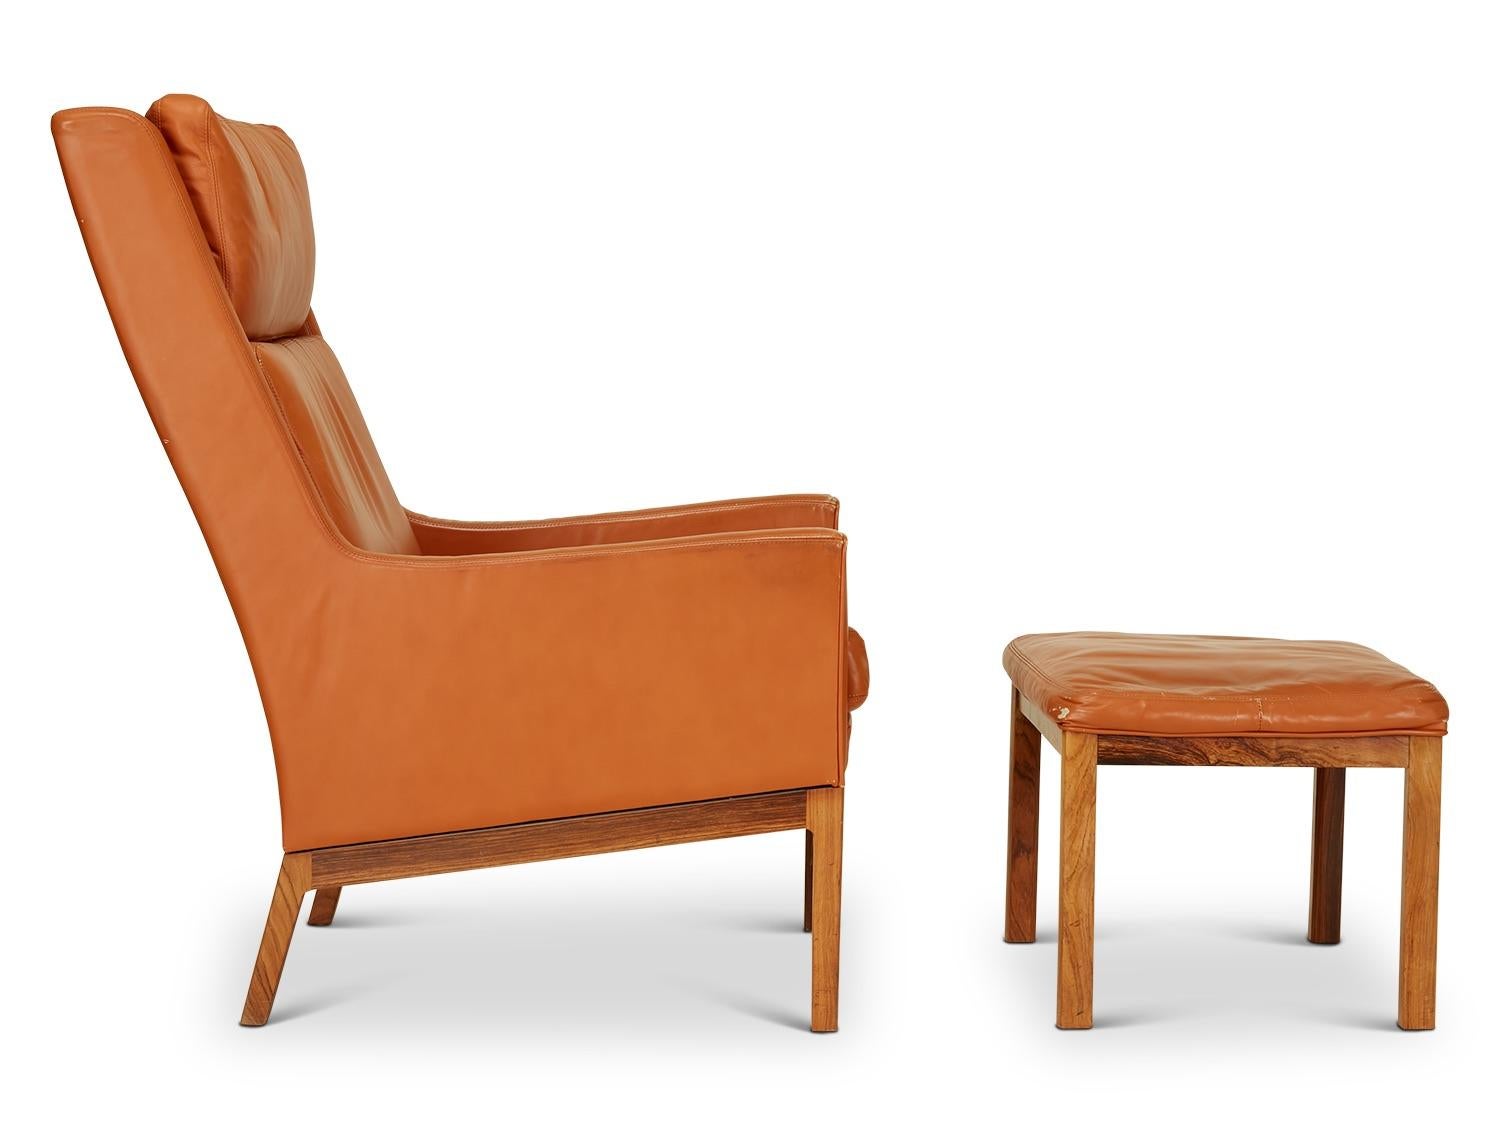 Pair leather and rosewood chairs and stool by Kai Lyngfeldt Larsen

Chair Dimensions: 26